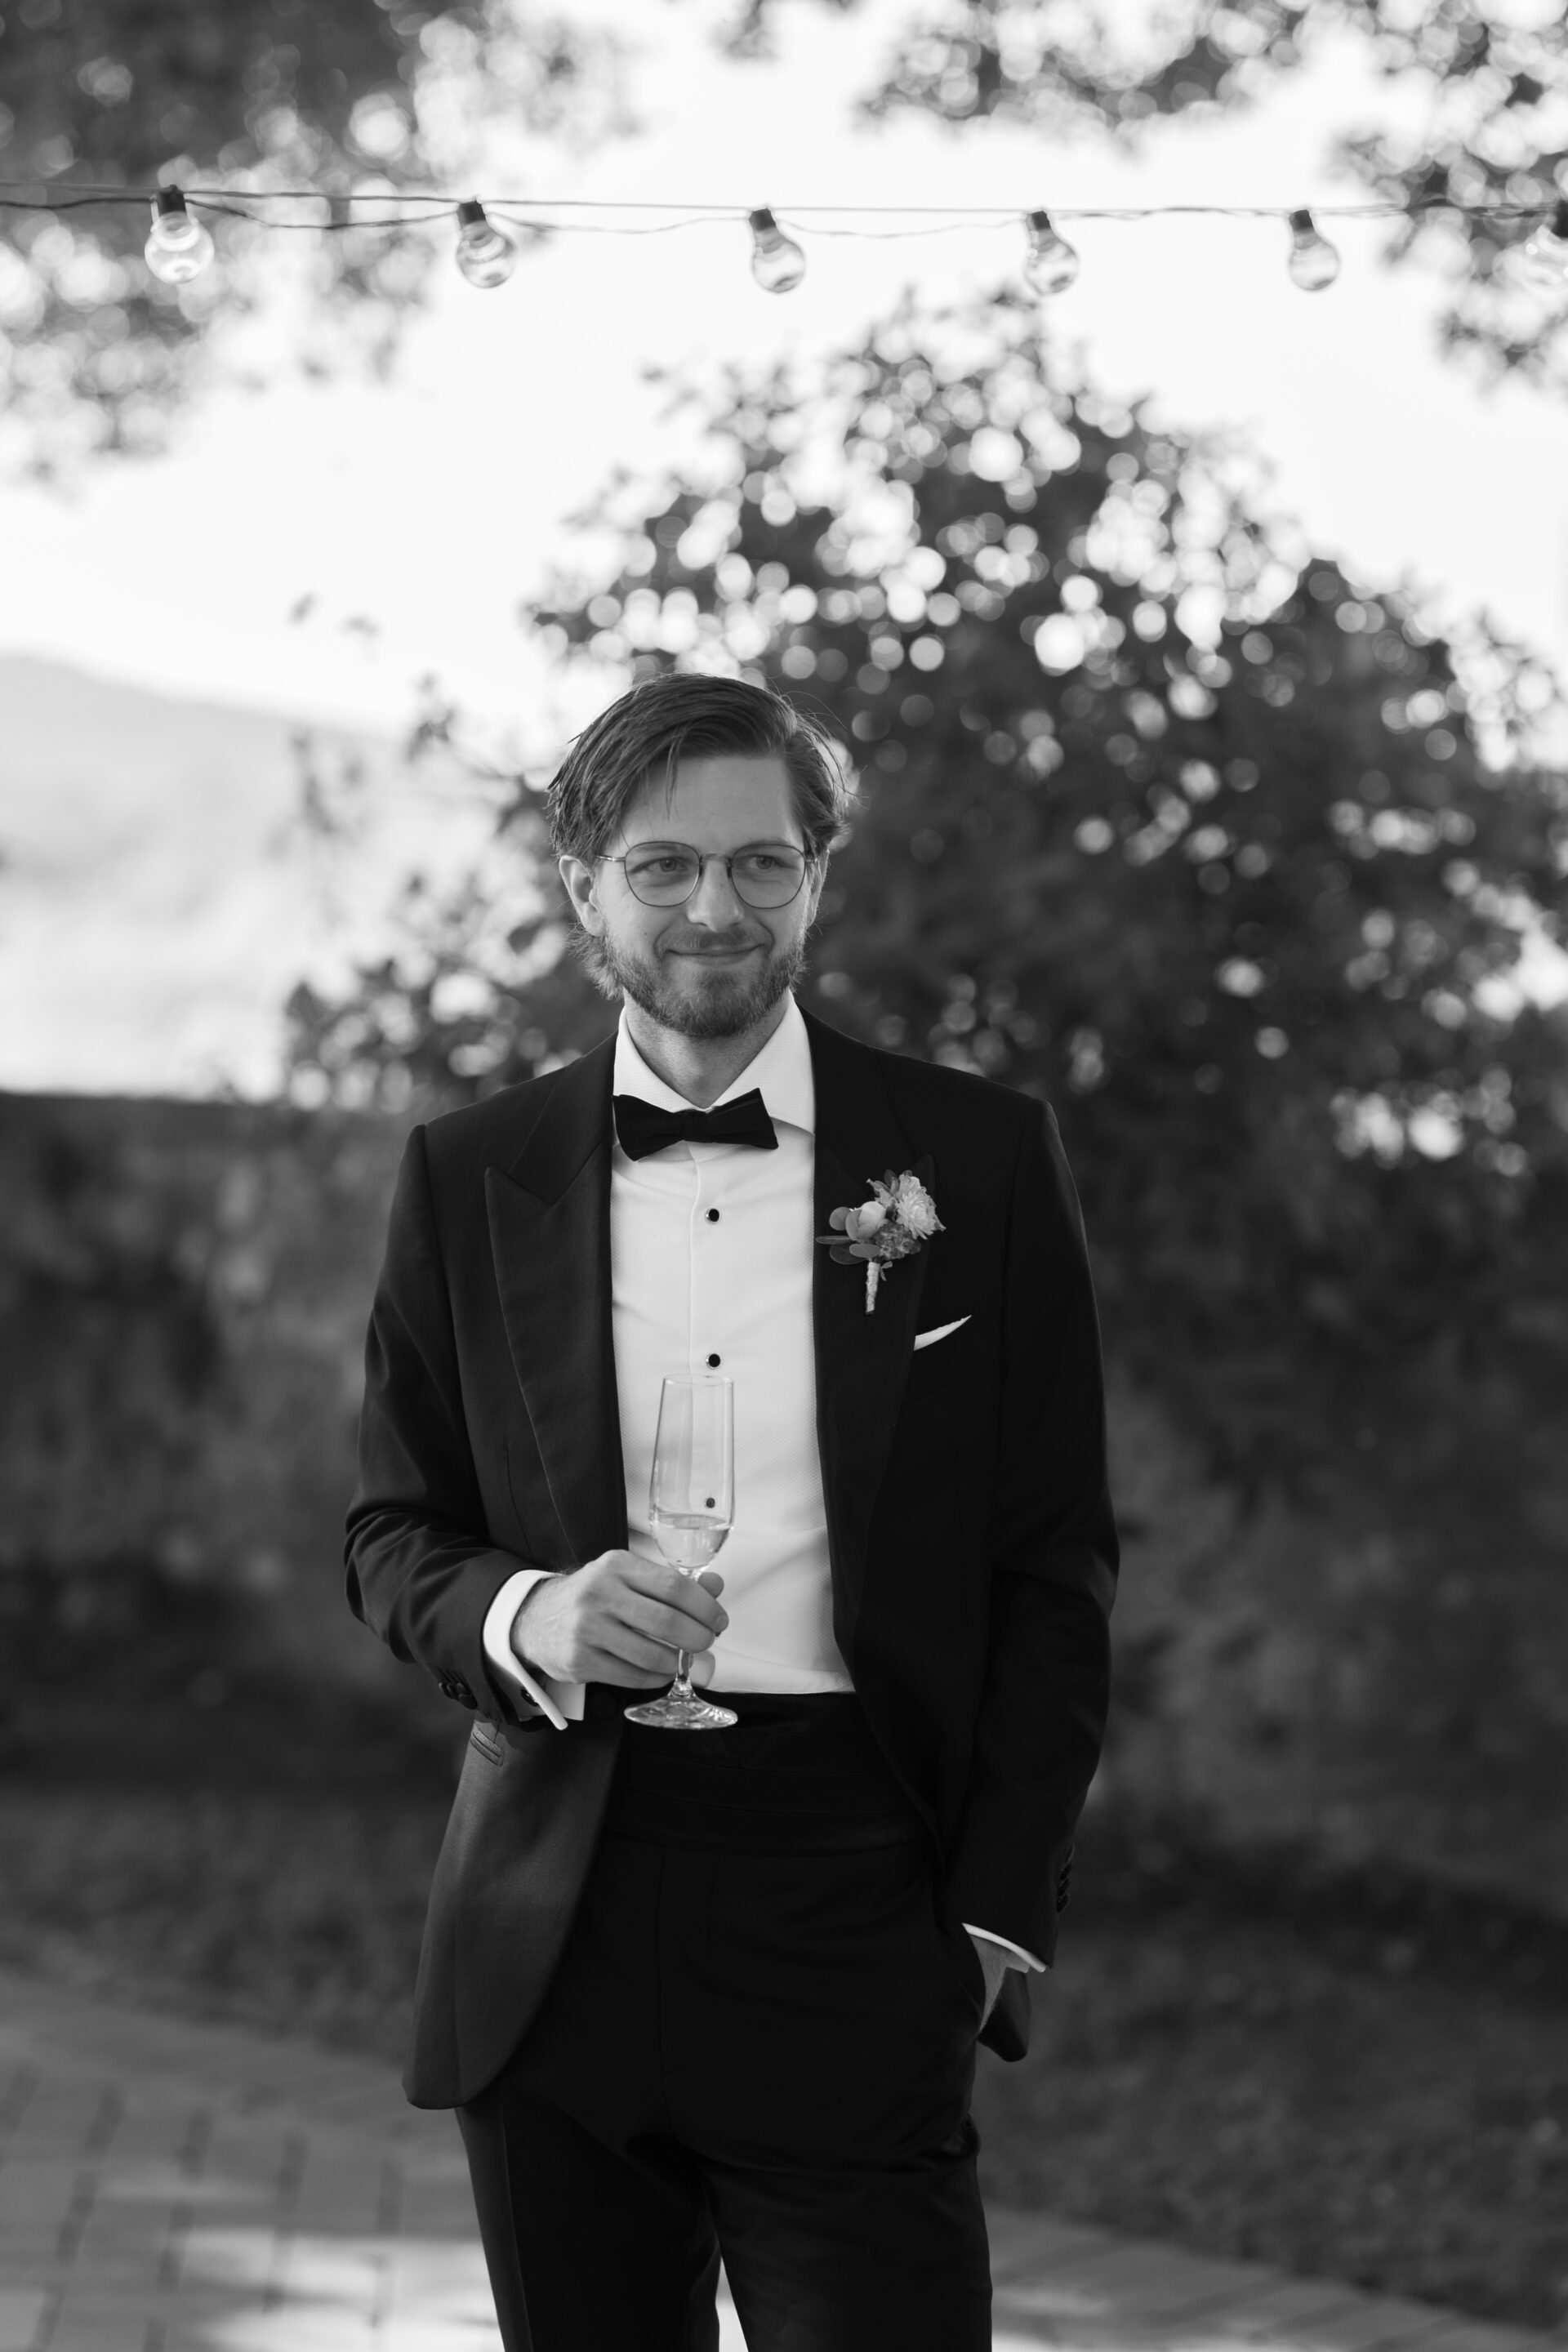 Italian wedding photography capturing a portrait of the groom before his Tuscan wedding